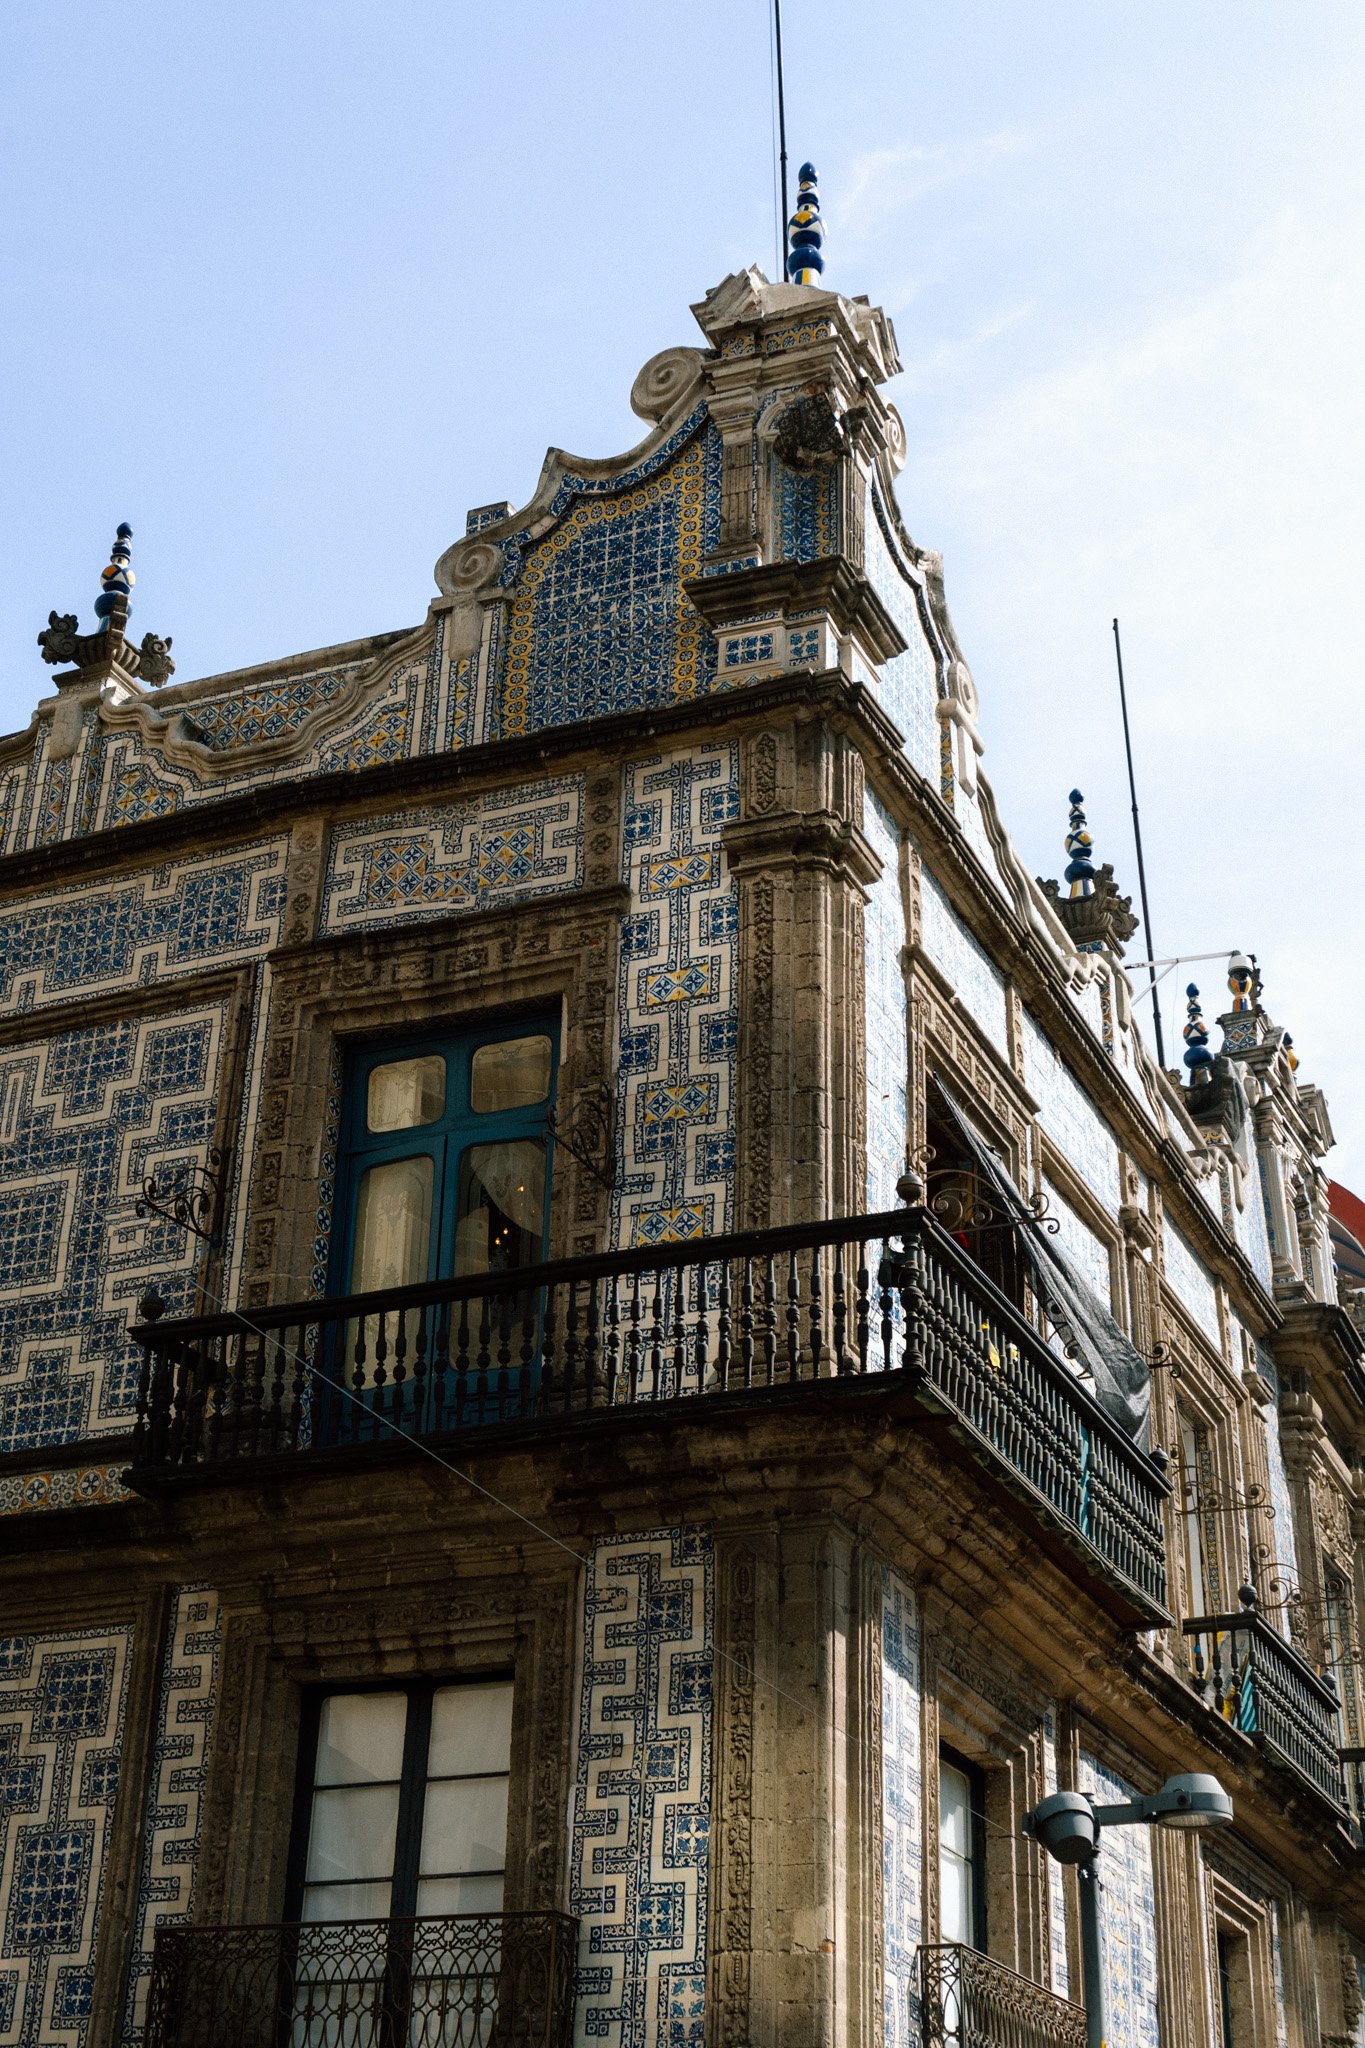 The House of Tiles in Centro